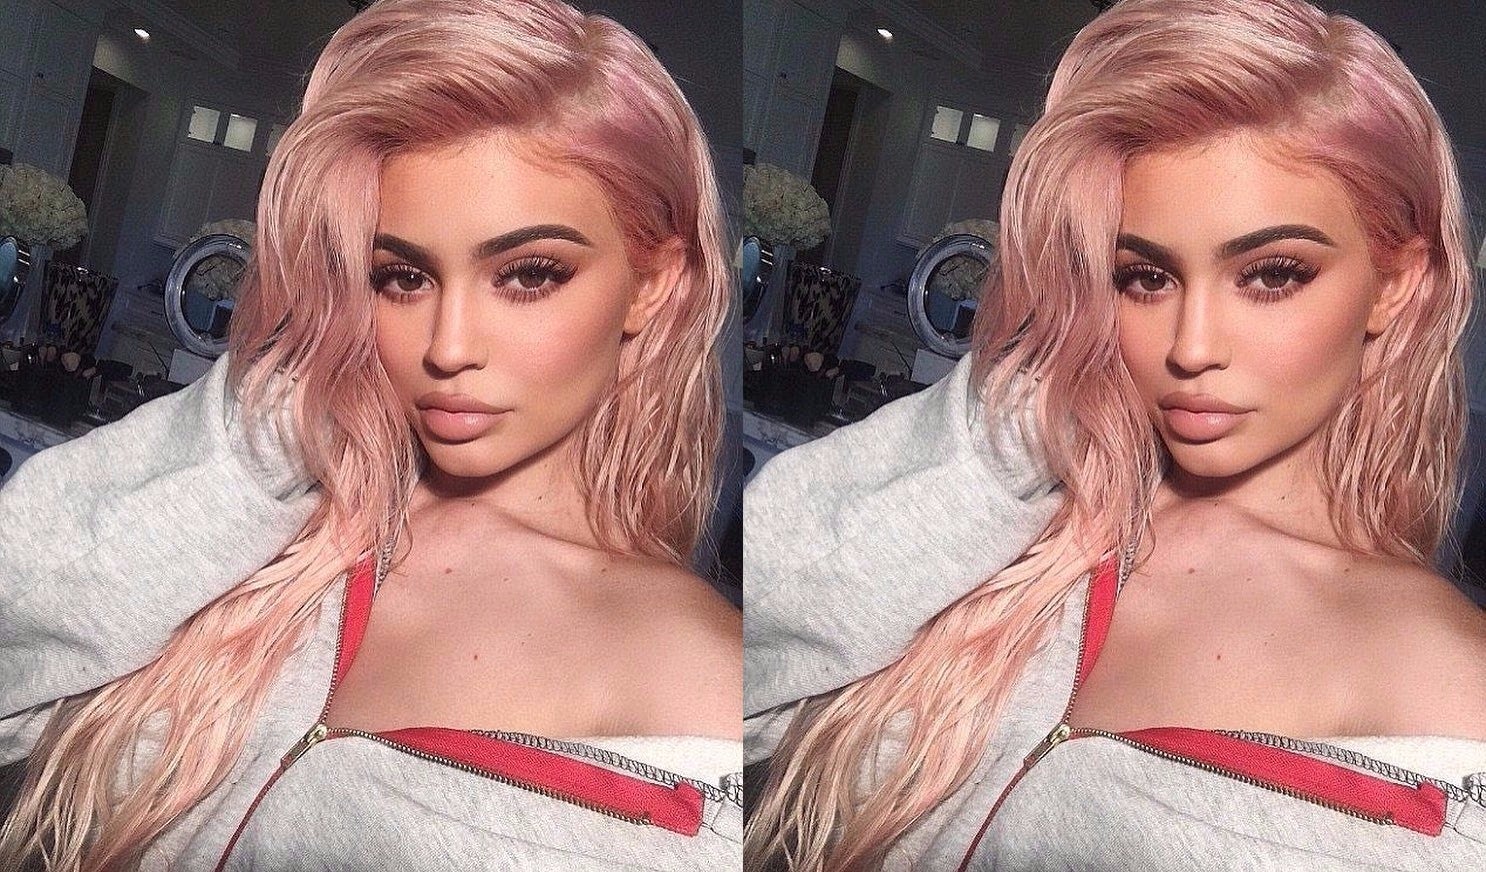 Kylie Jenner Is Pregnant With Travis Scott! Details About Kylie Jenner's Pregnancy And Photos Of Her Baby Bump